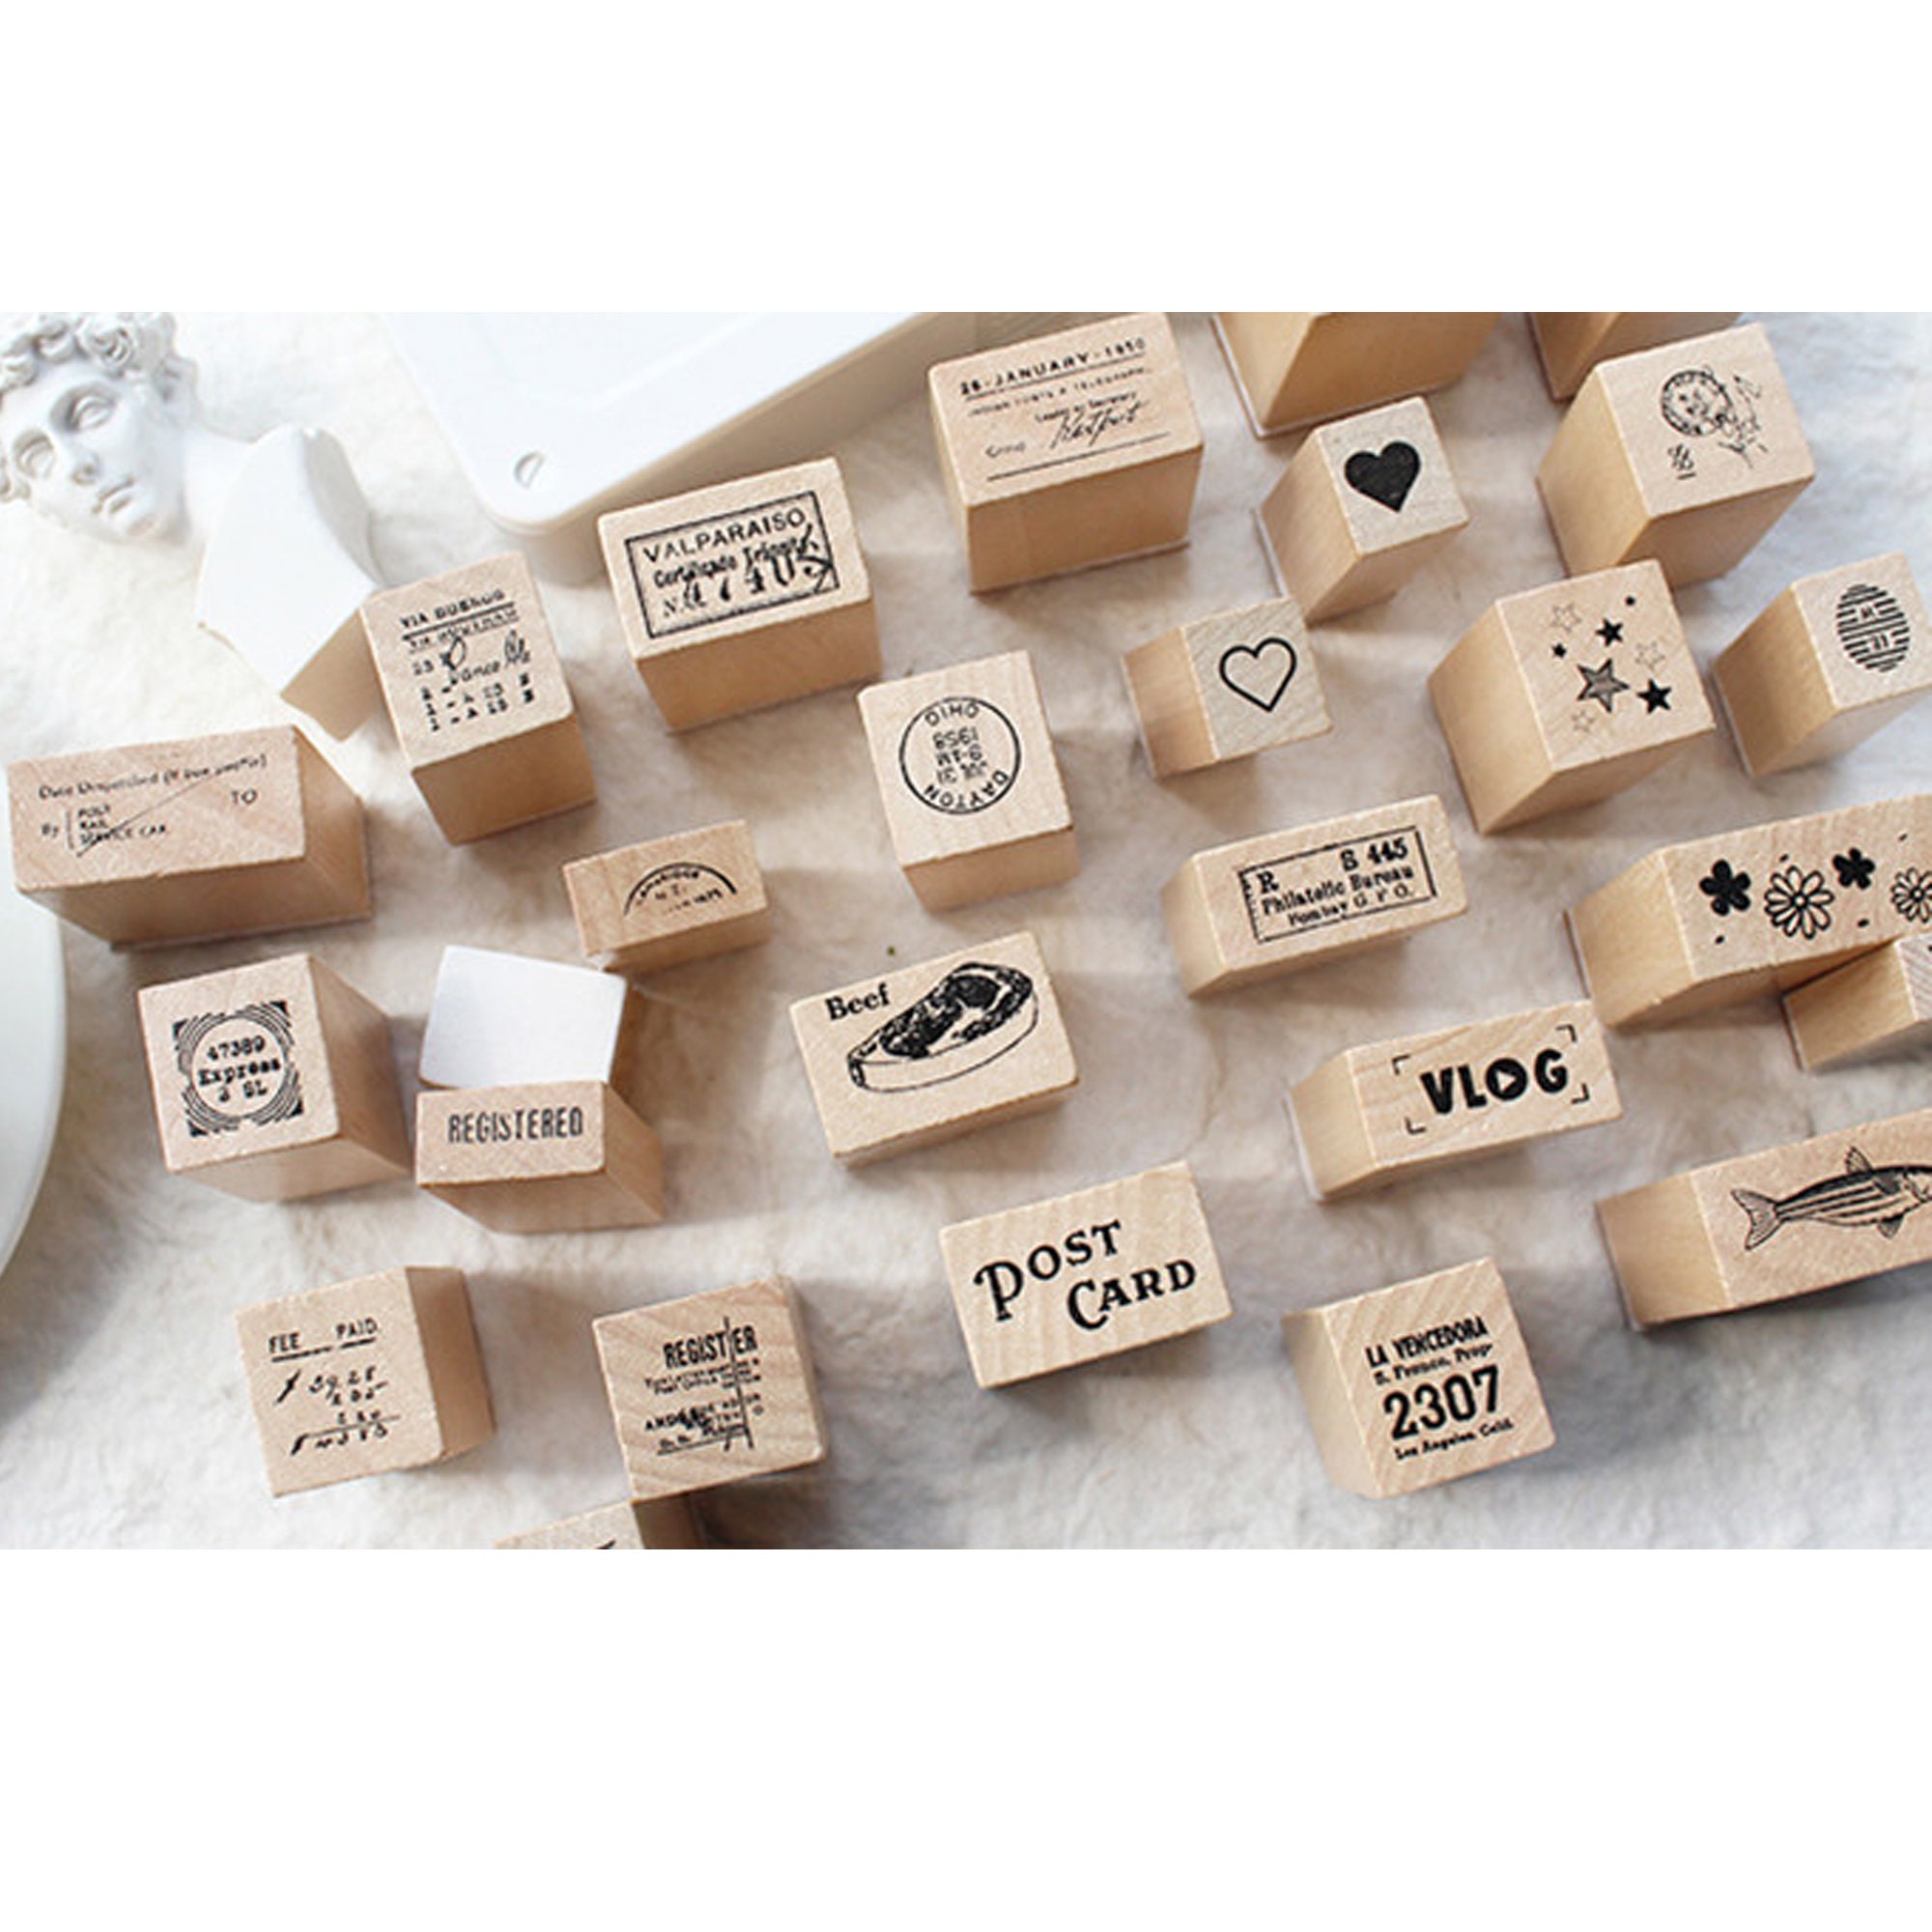 Wood Stamp Rubber Stamp 28 Options Small Wood Rubber Stamps Postmark  Scrapbooking Collage Fish Beef Love Flower M04 Wood Stamp-28 